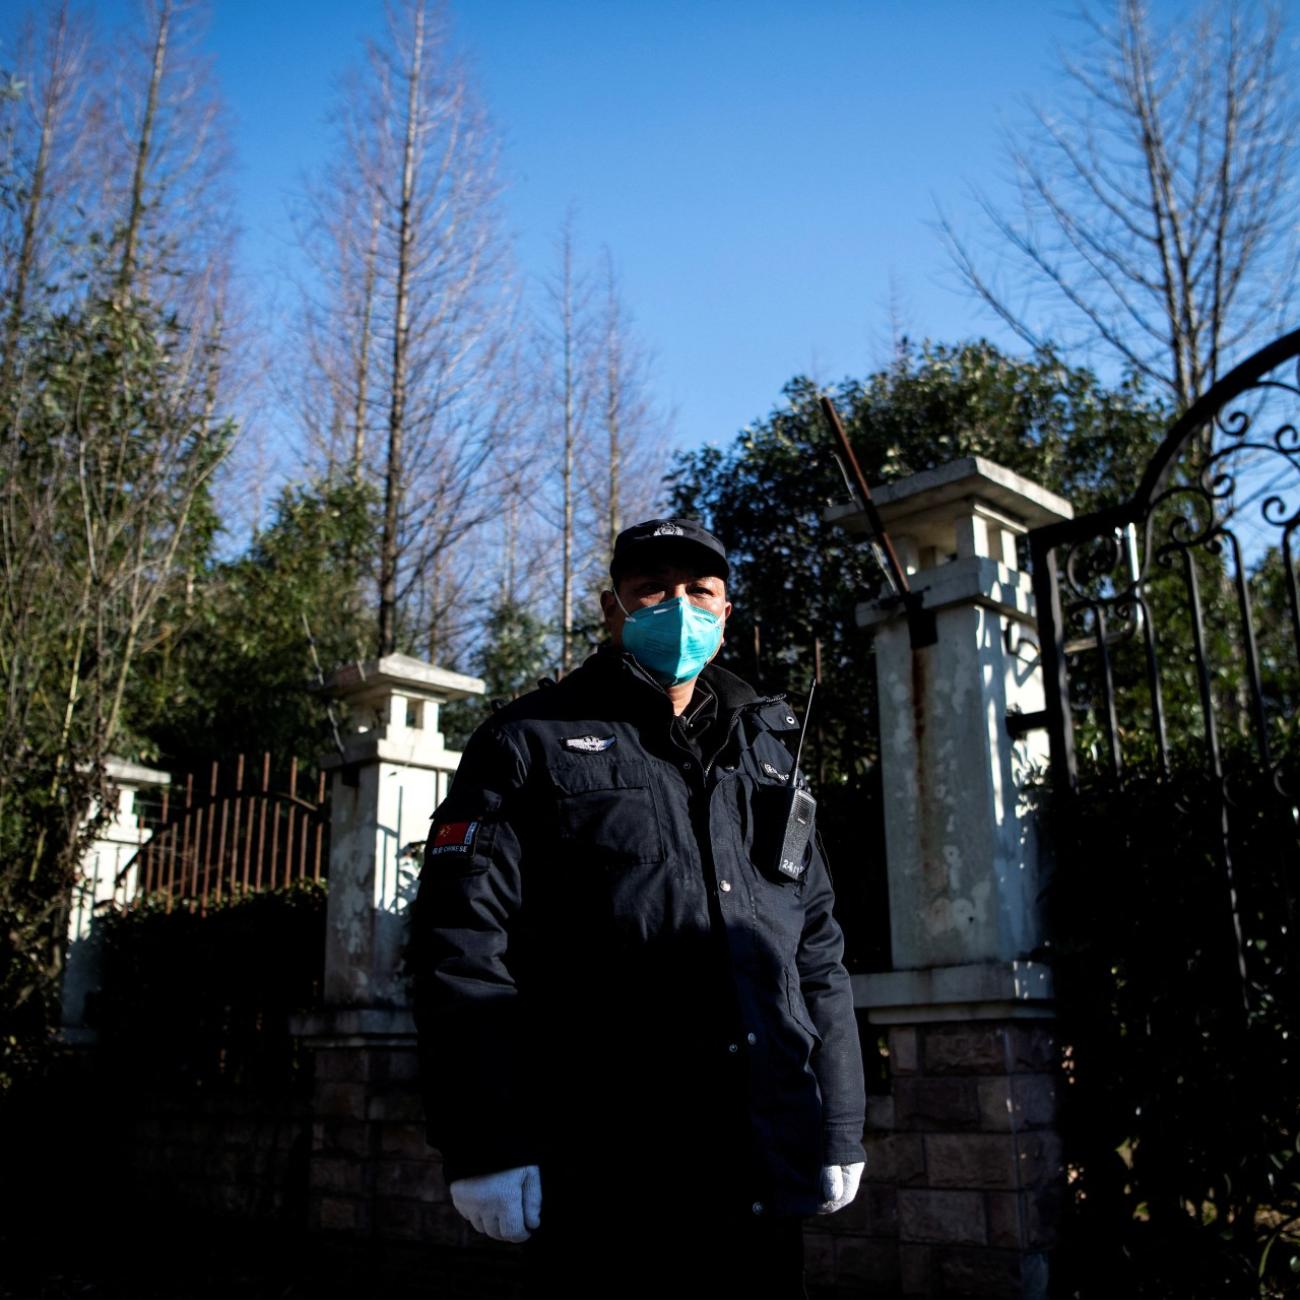 A guard stands at the gate of the Shanghai Public Clinical Center Shanghai, where the coronavirus patients are quarantined, in Shanghai, China February 17, 2020.